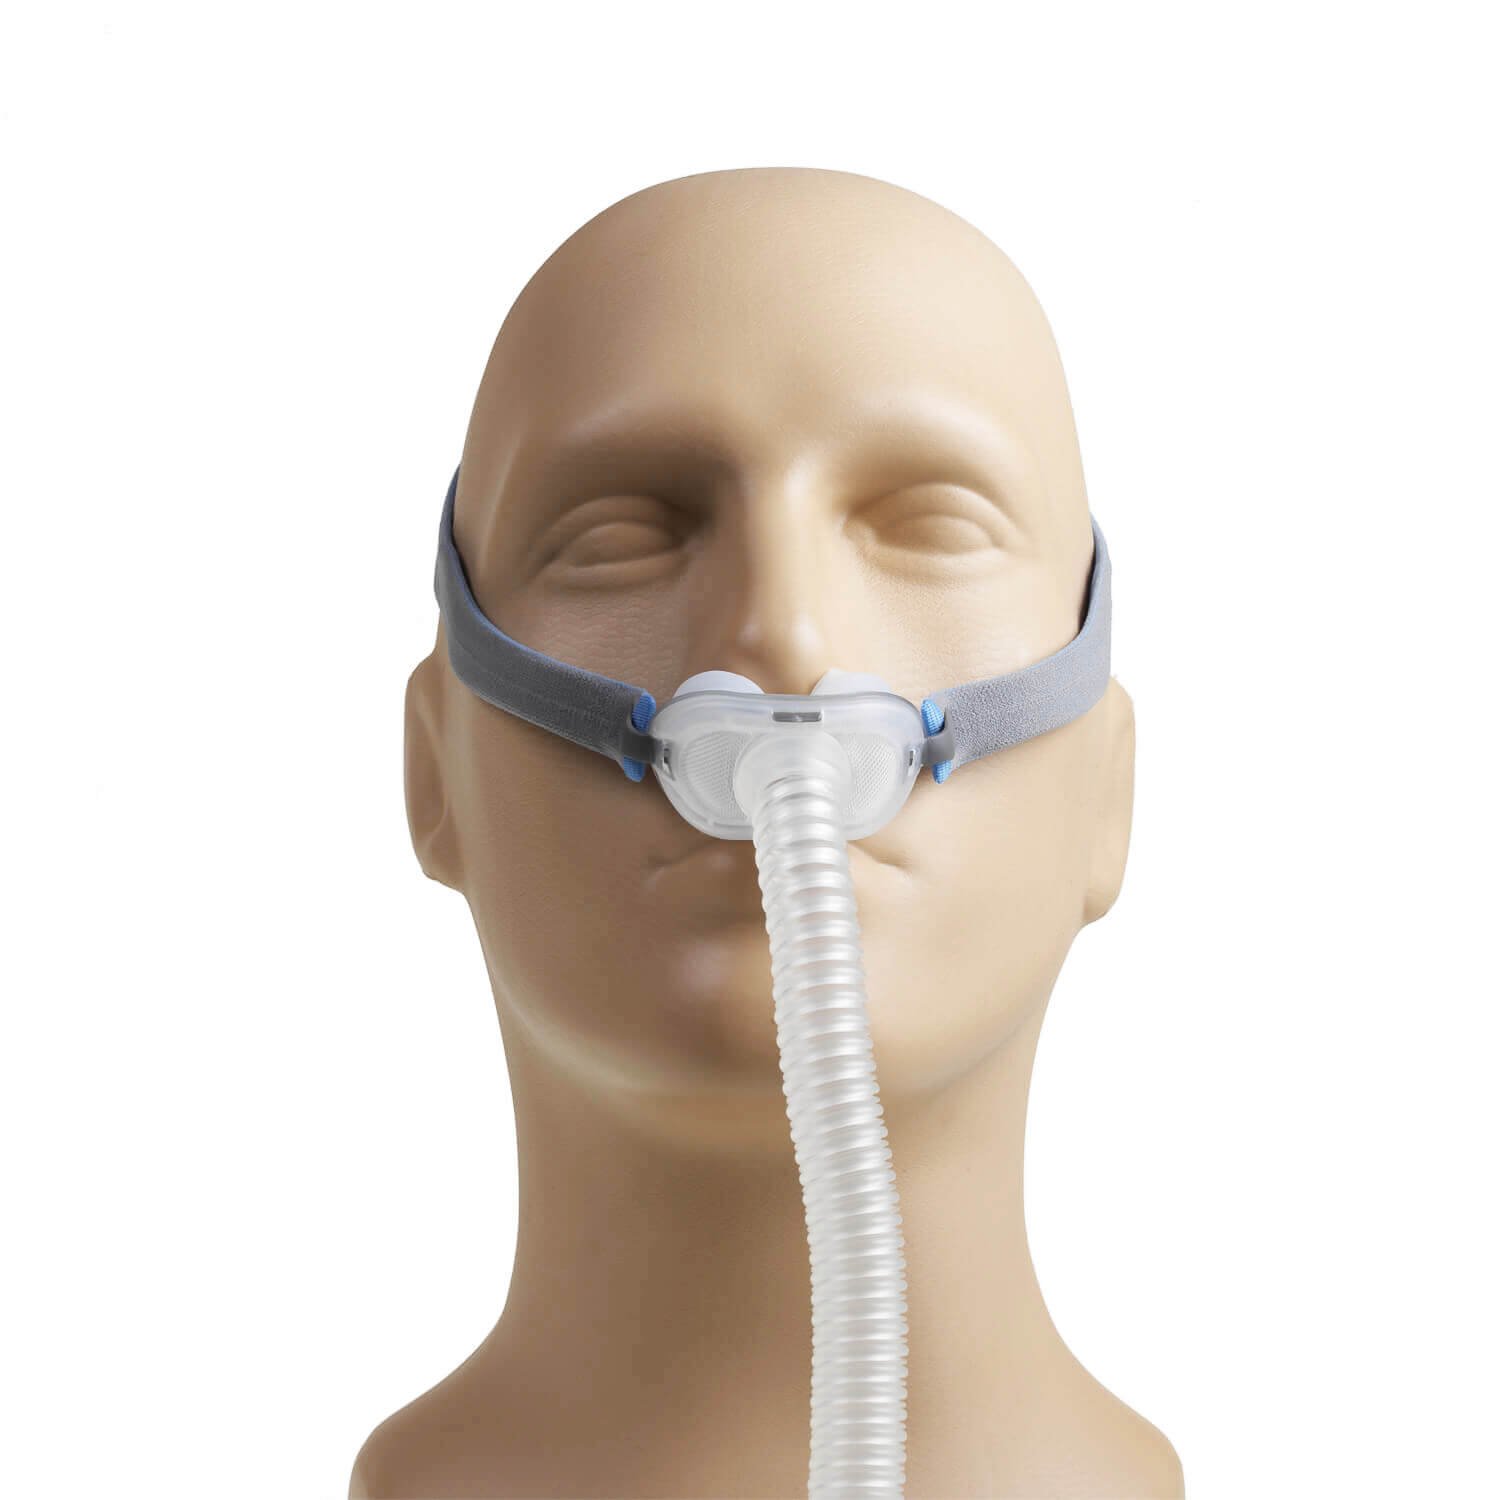 New Airfit P Nasal Pillow Cpap Mask With Headgear Kit Size S M L In One Package